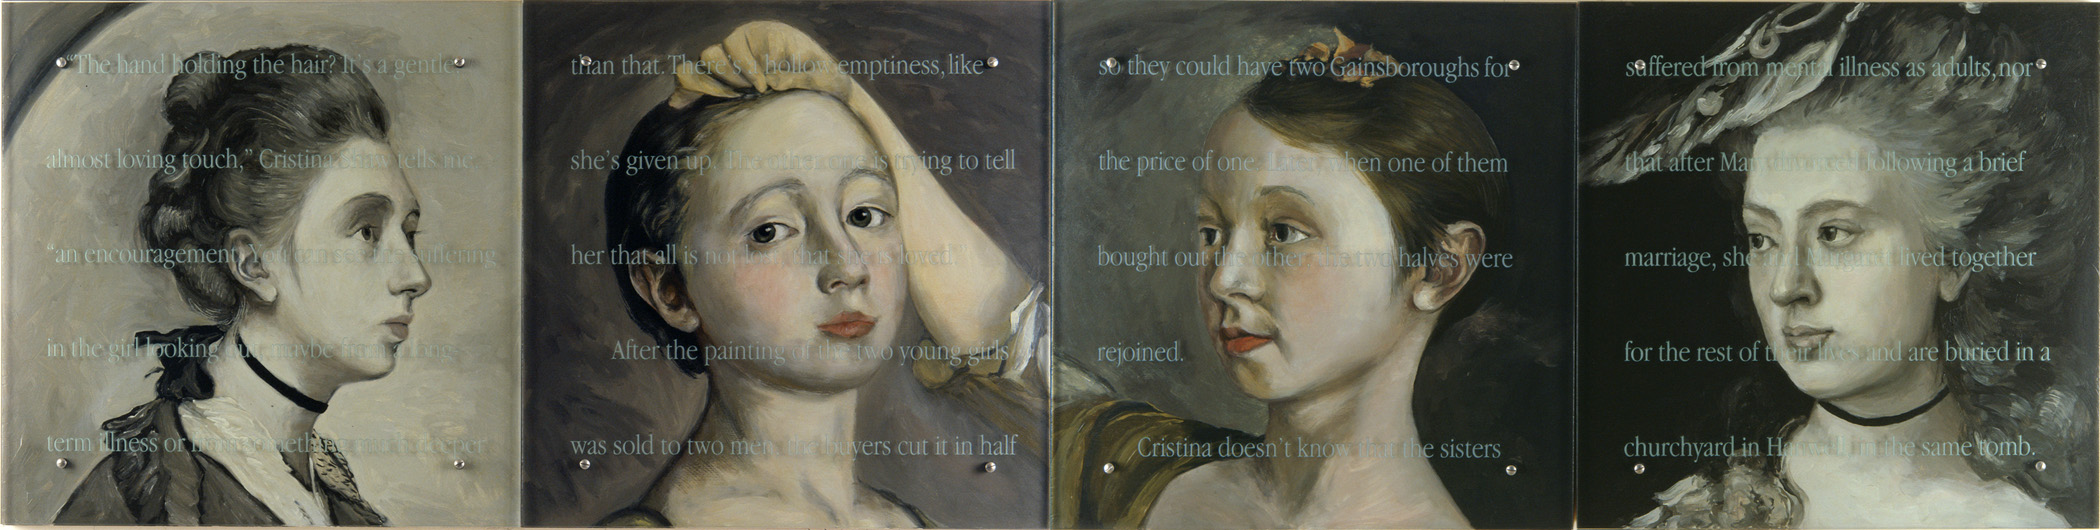  Loved, 120" x 30" (305cm x 76.5cm) four panels, oil/wood, sandblasted glass, bolts After Gainsborough, The artist's two daughters, V&A, and his single portraits of daughters Mary and Margaret in the Tate Britain Text: "The hand holding the hair? It's a gentle, almost loving touch," Cristina Shaw tells me, "an encouragement. You can see the suffering in the girl looking out, maybe from a long-term illness or from something much deeper than that. There's a hollow emptiness, like she's given up. The other one is trying to tell her that all is not lost, that she is loved." After the painting of the two young girls was sold to two men, the buyers cut it in half so they could have two Gainsboroughs for the price of one. Later, when one of them bought out the other, the two halves were rejoined. Cristina doesn't know that the sisters suffered from mental illness as adults, nor that after Mary divorced following a brief marriage, she and Margaret lived together for the rest of their lives and are buried in a churchyard in Hanwell, in the same tomb.